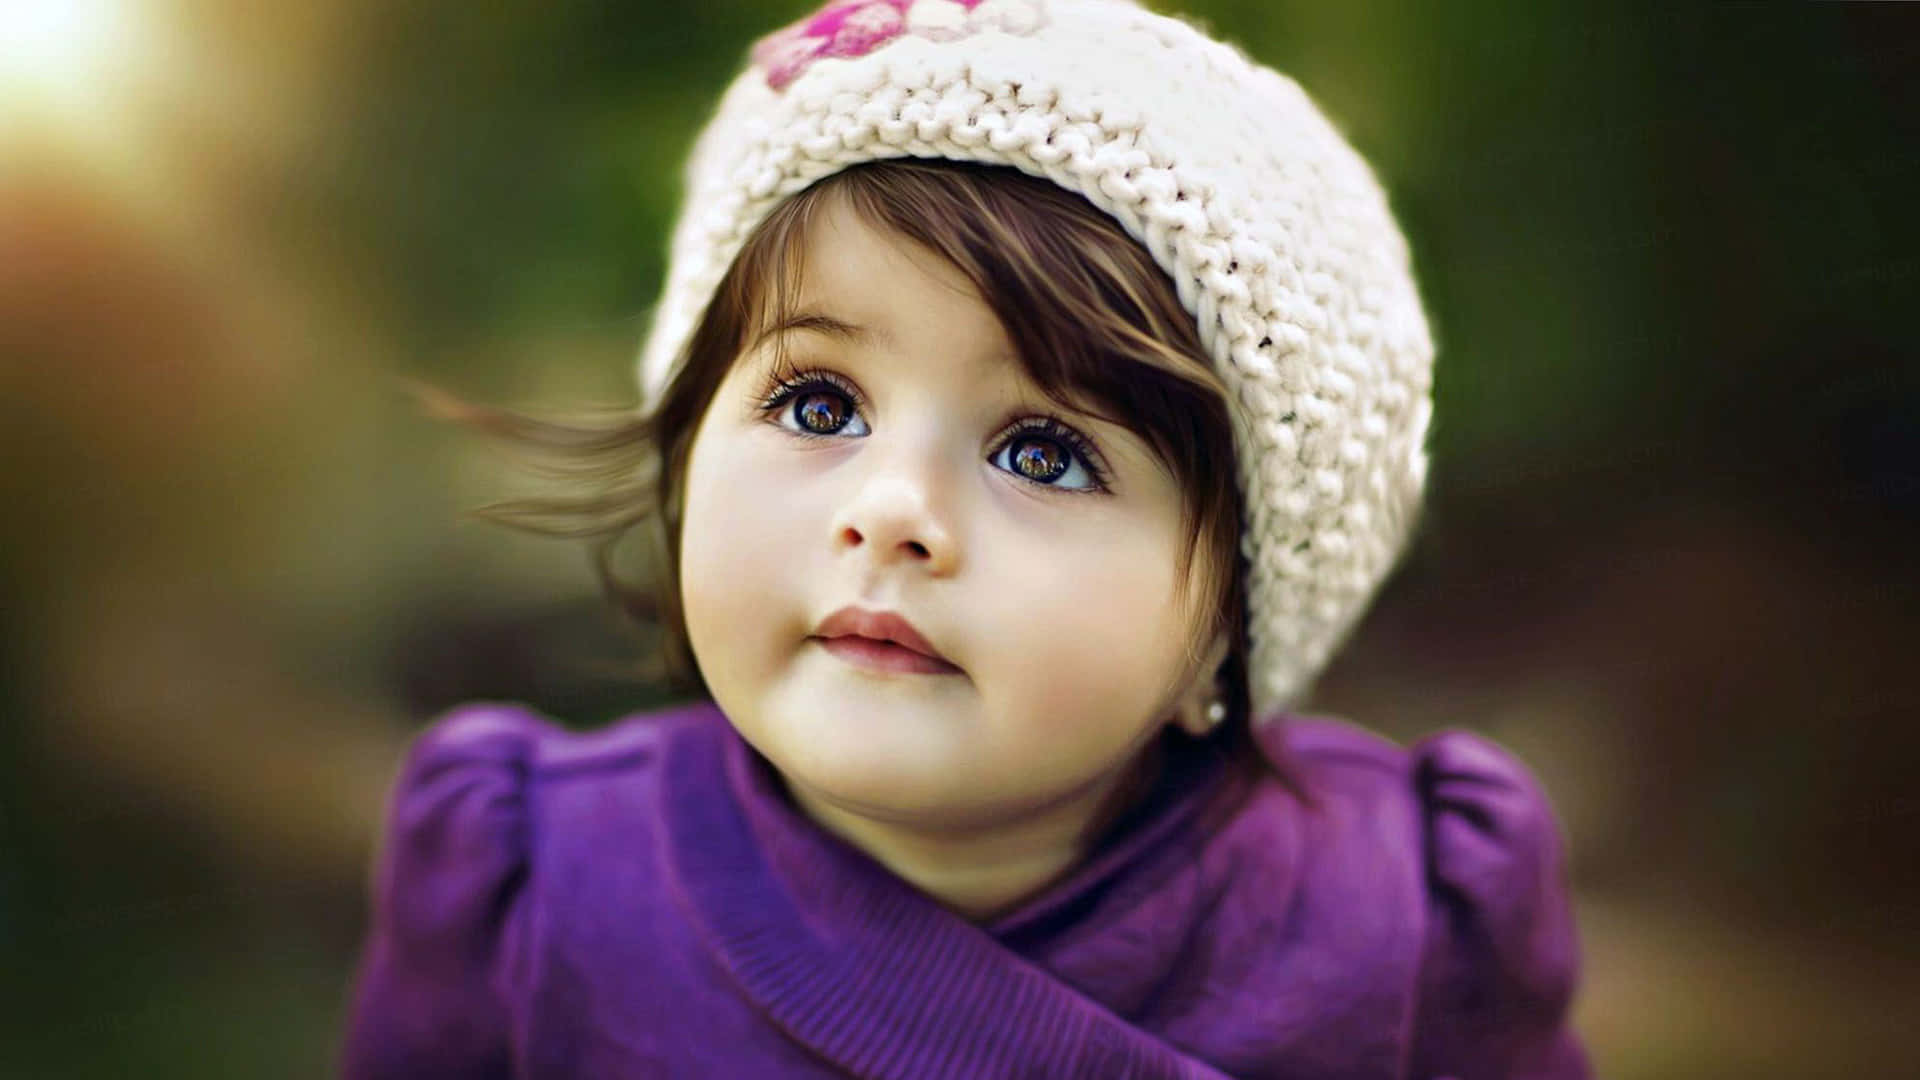 Cute girl smiling Wallpapers | HD Wallpapers | ID #580